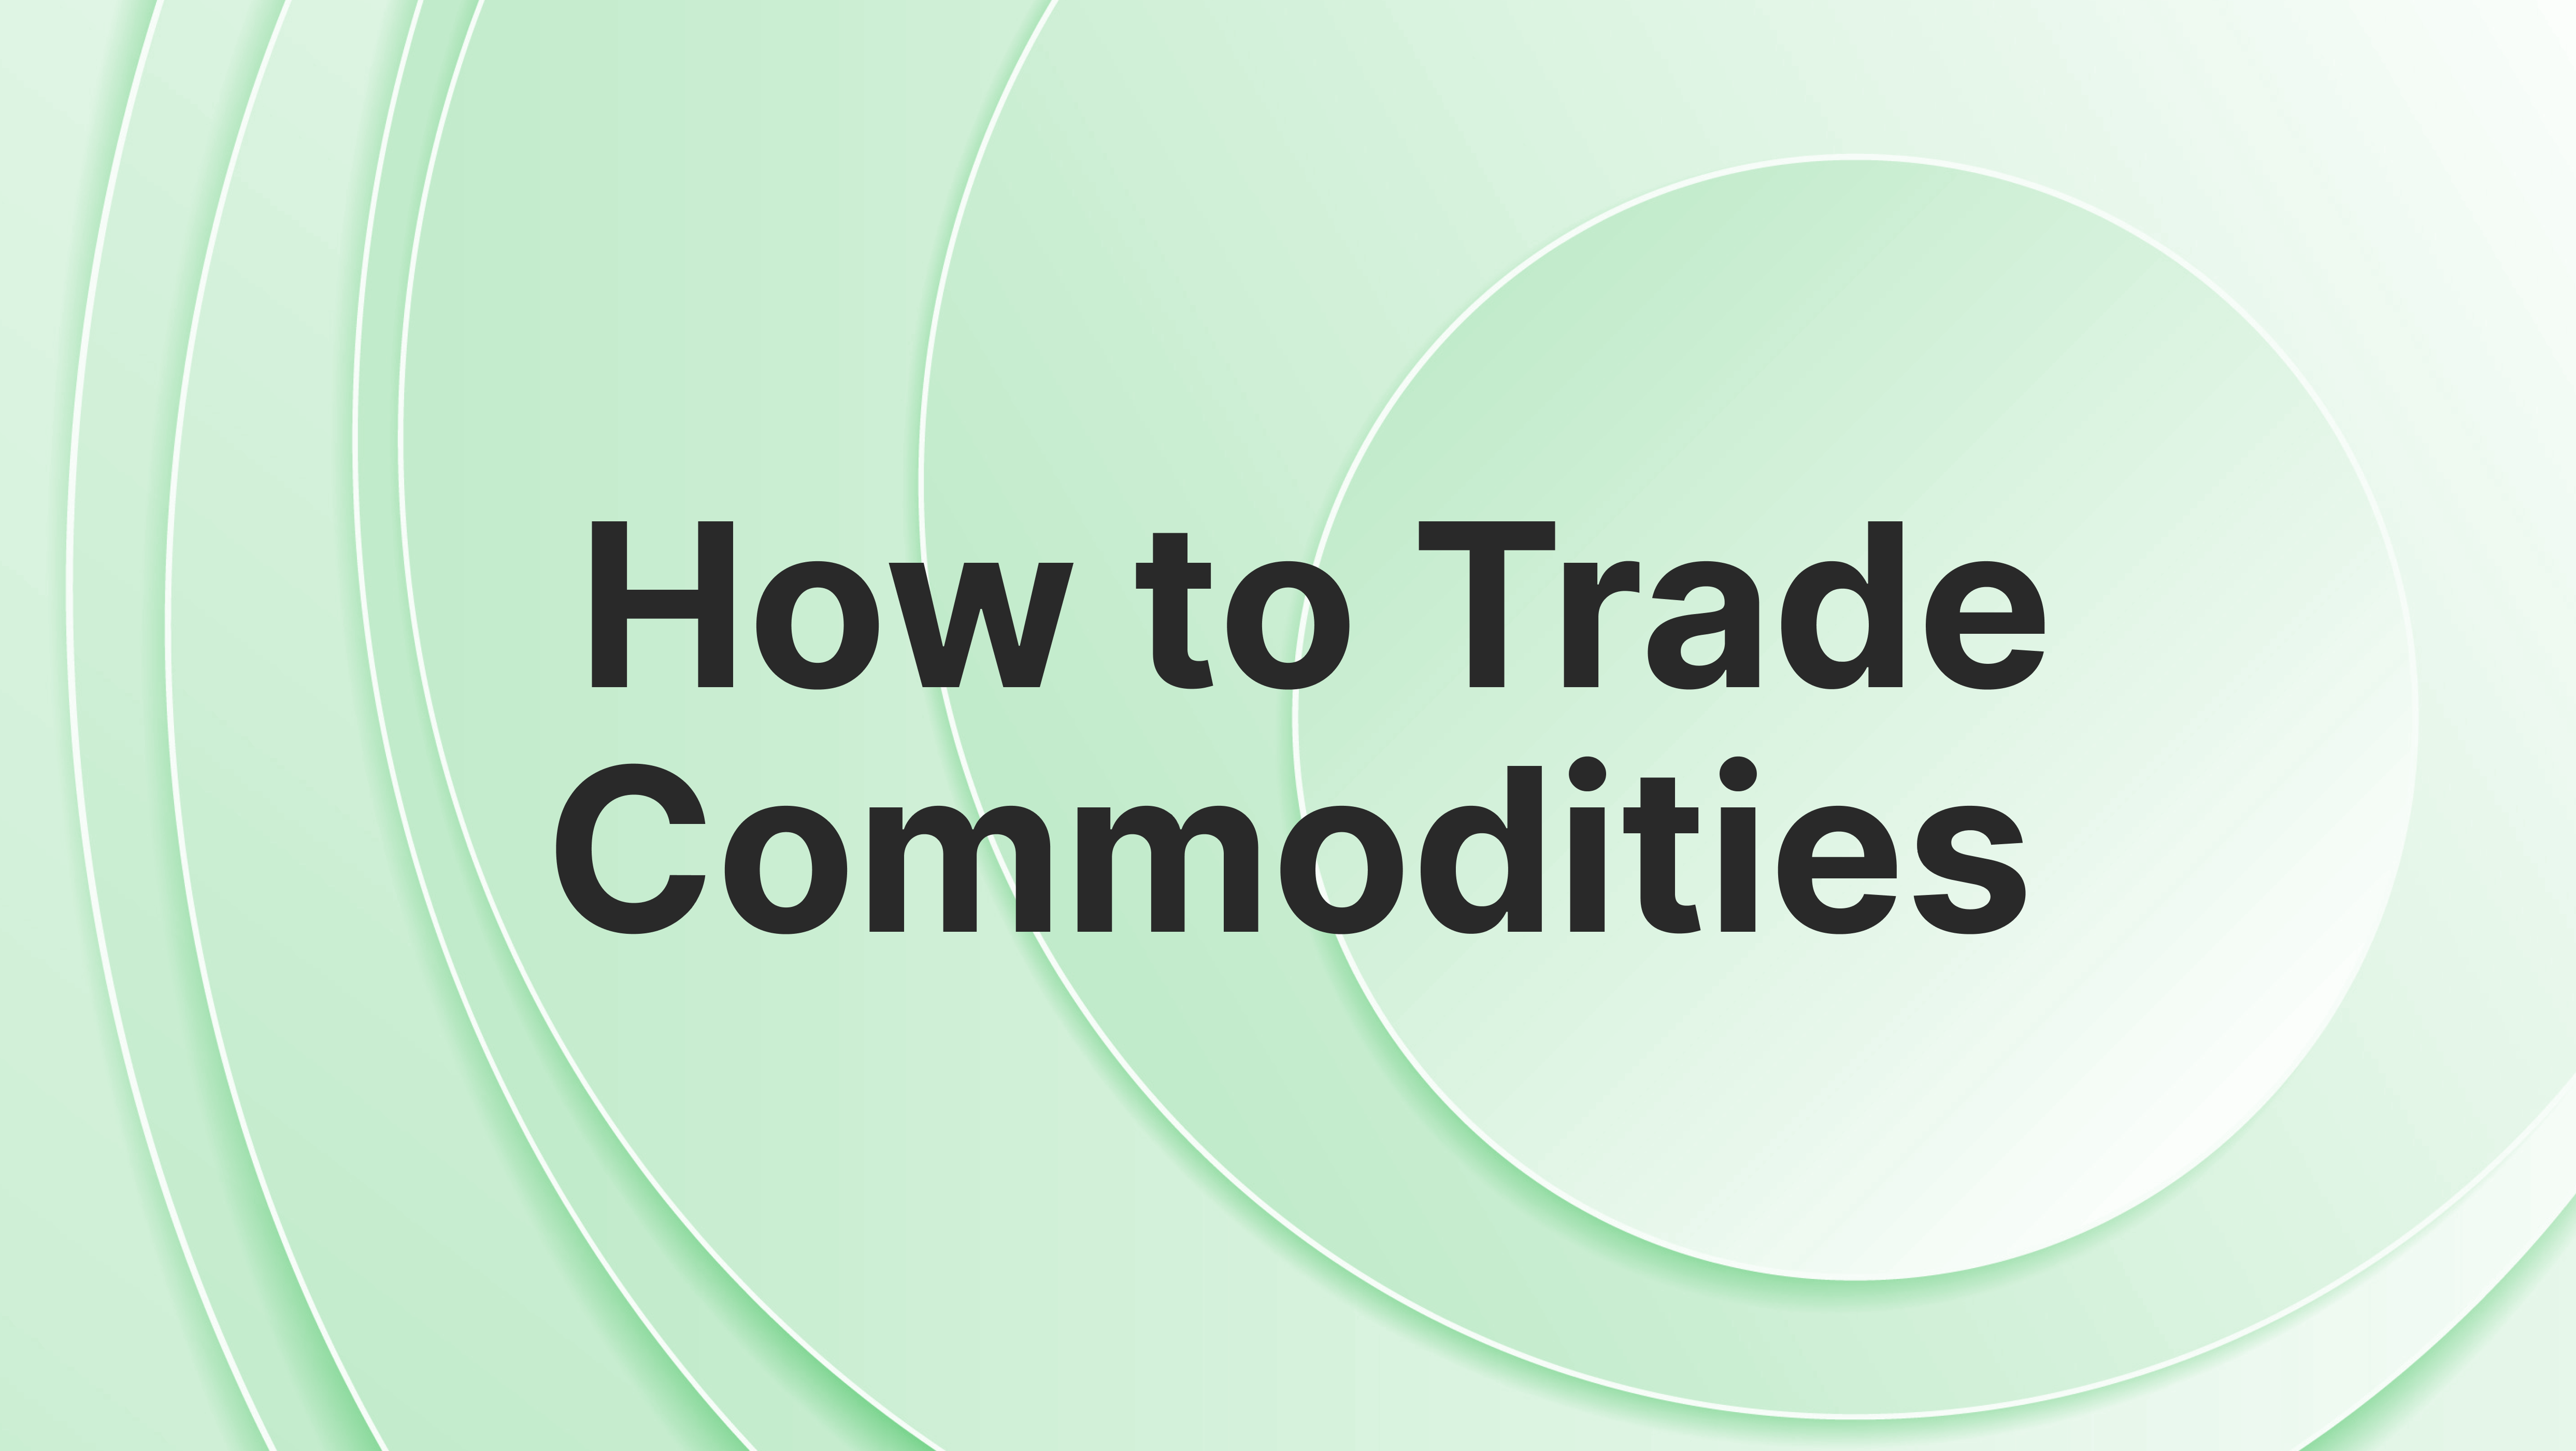 what can you trade in commodities market